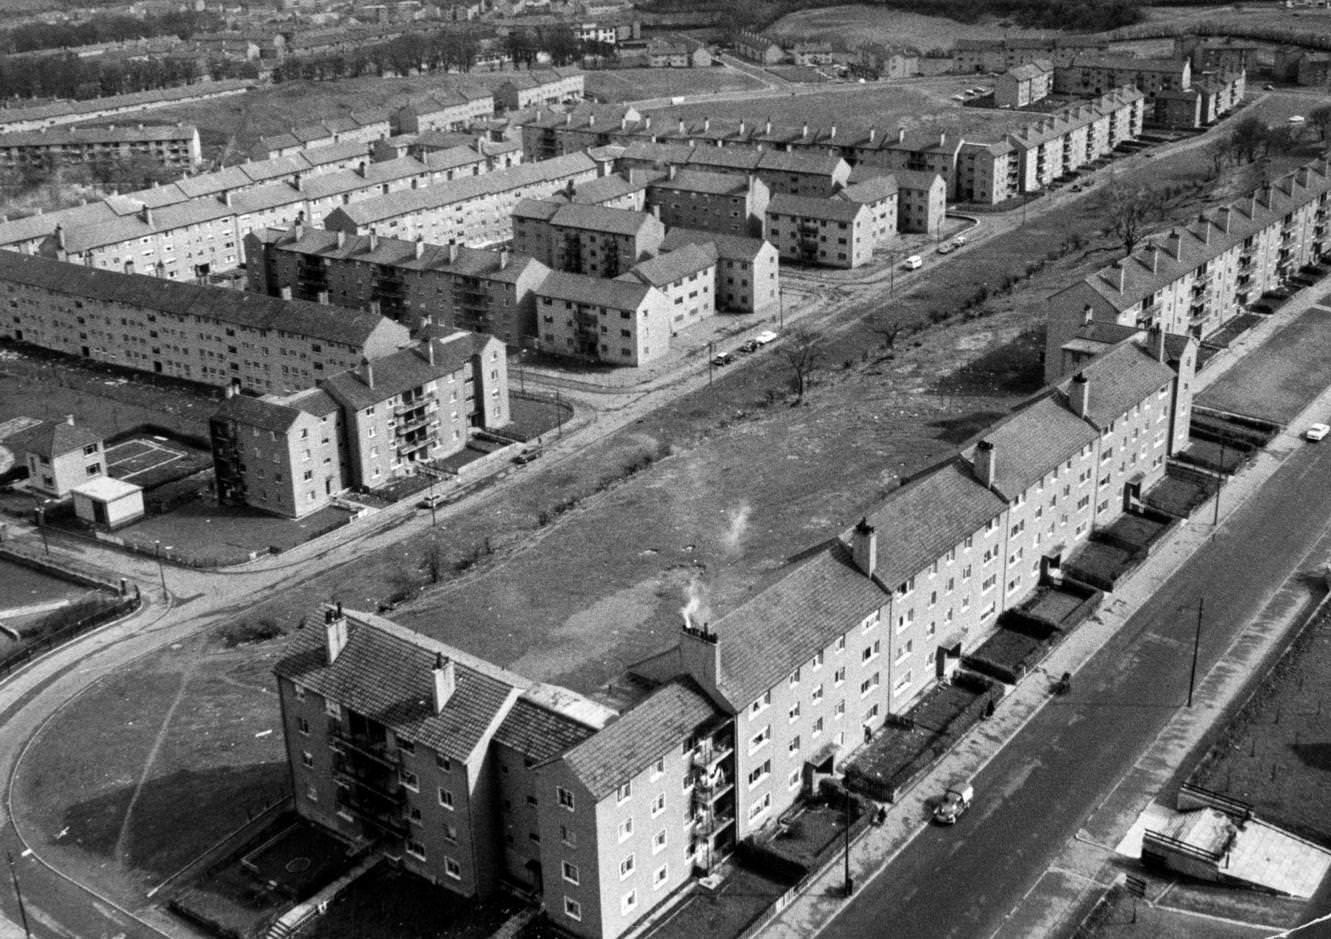 Rows of houses in Glasgow, Scotland, 29th March 1969.